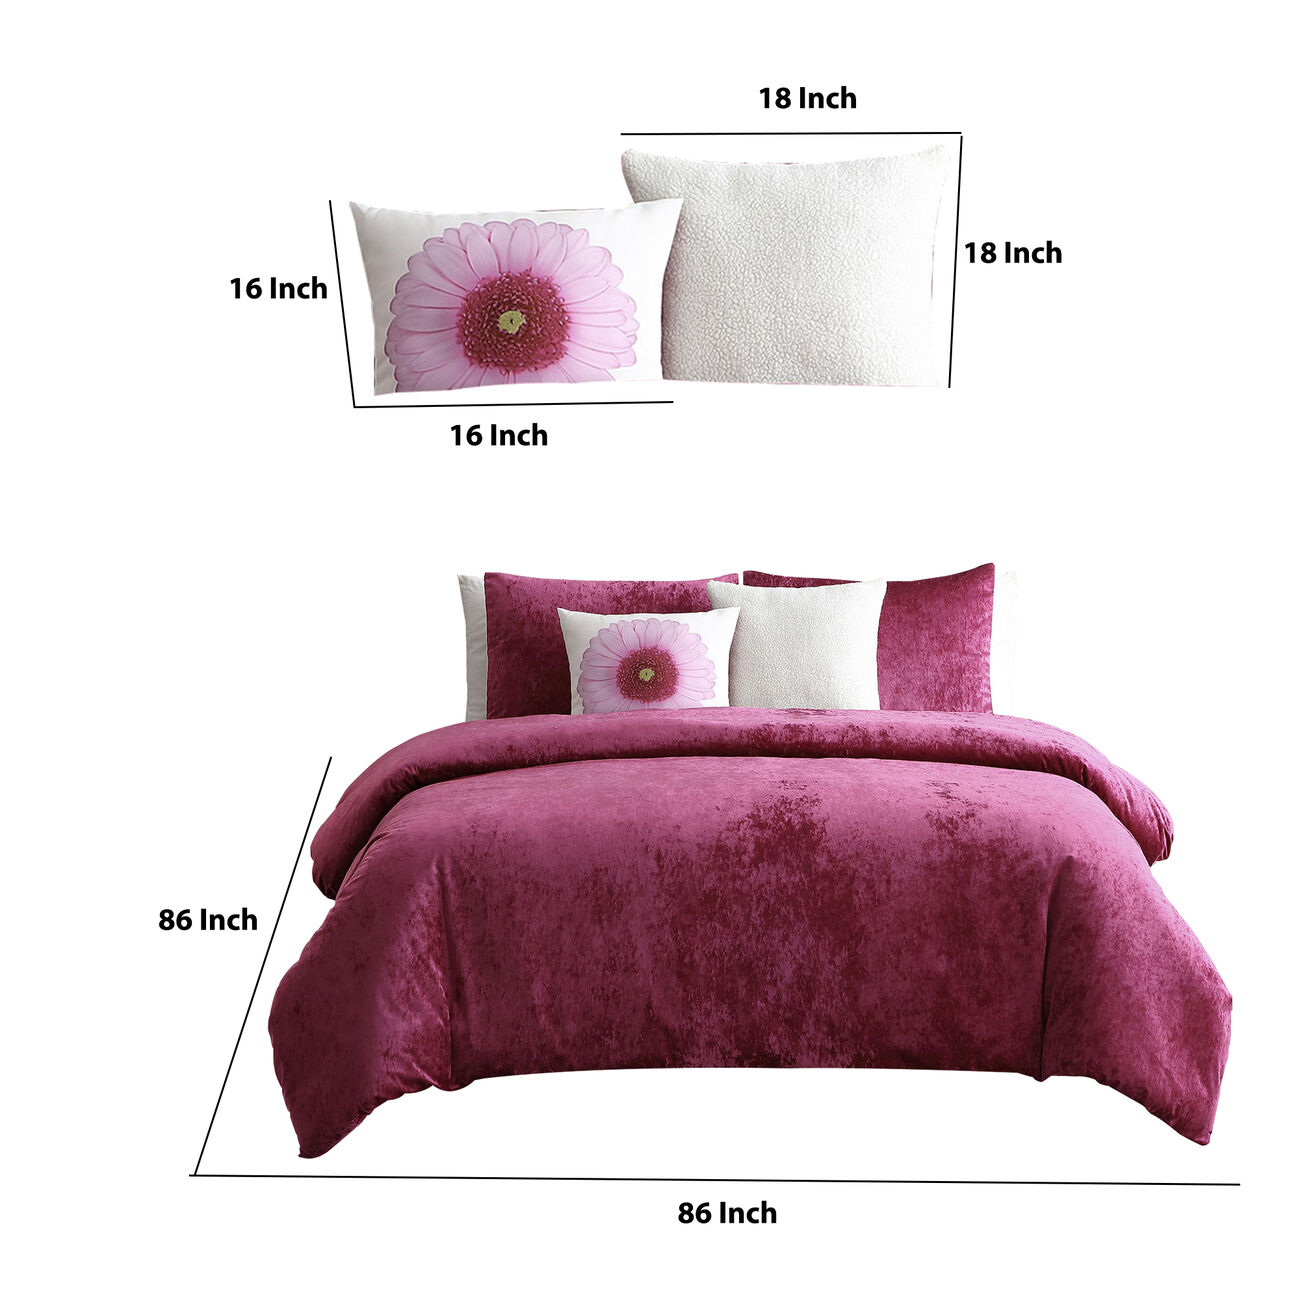 5 Piece Velvet Full Size Comforter Set with Accent Pillows, Pink